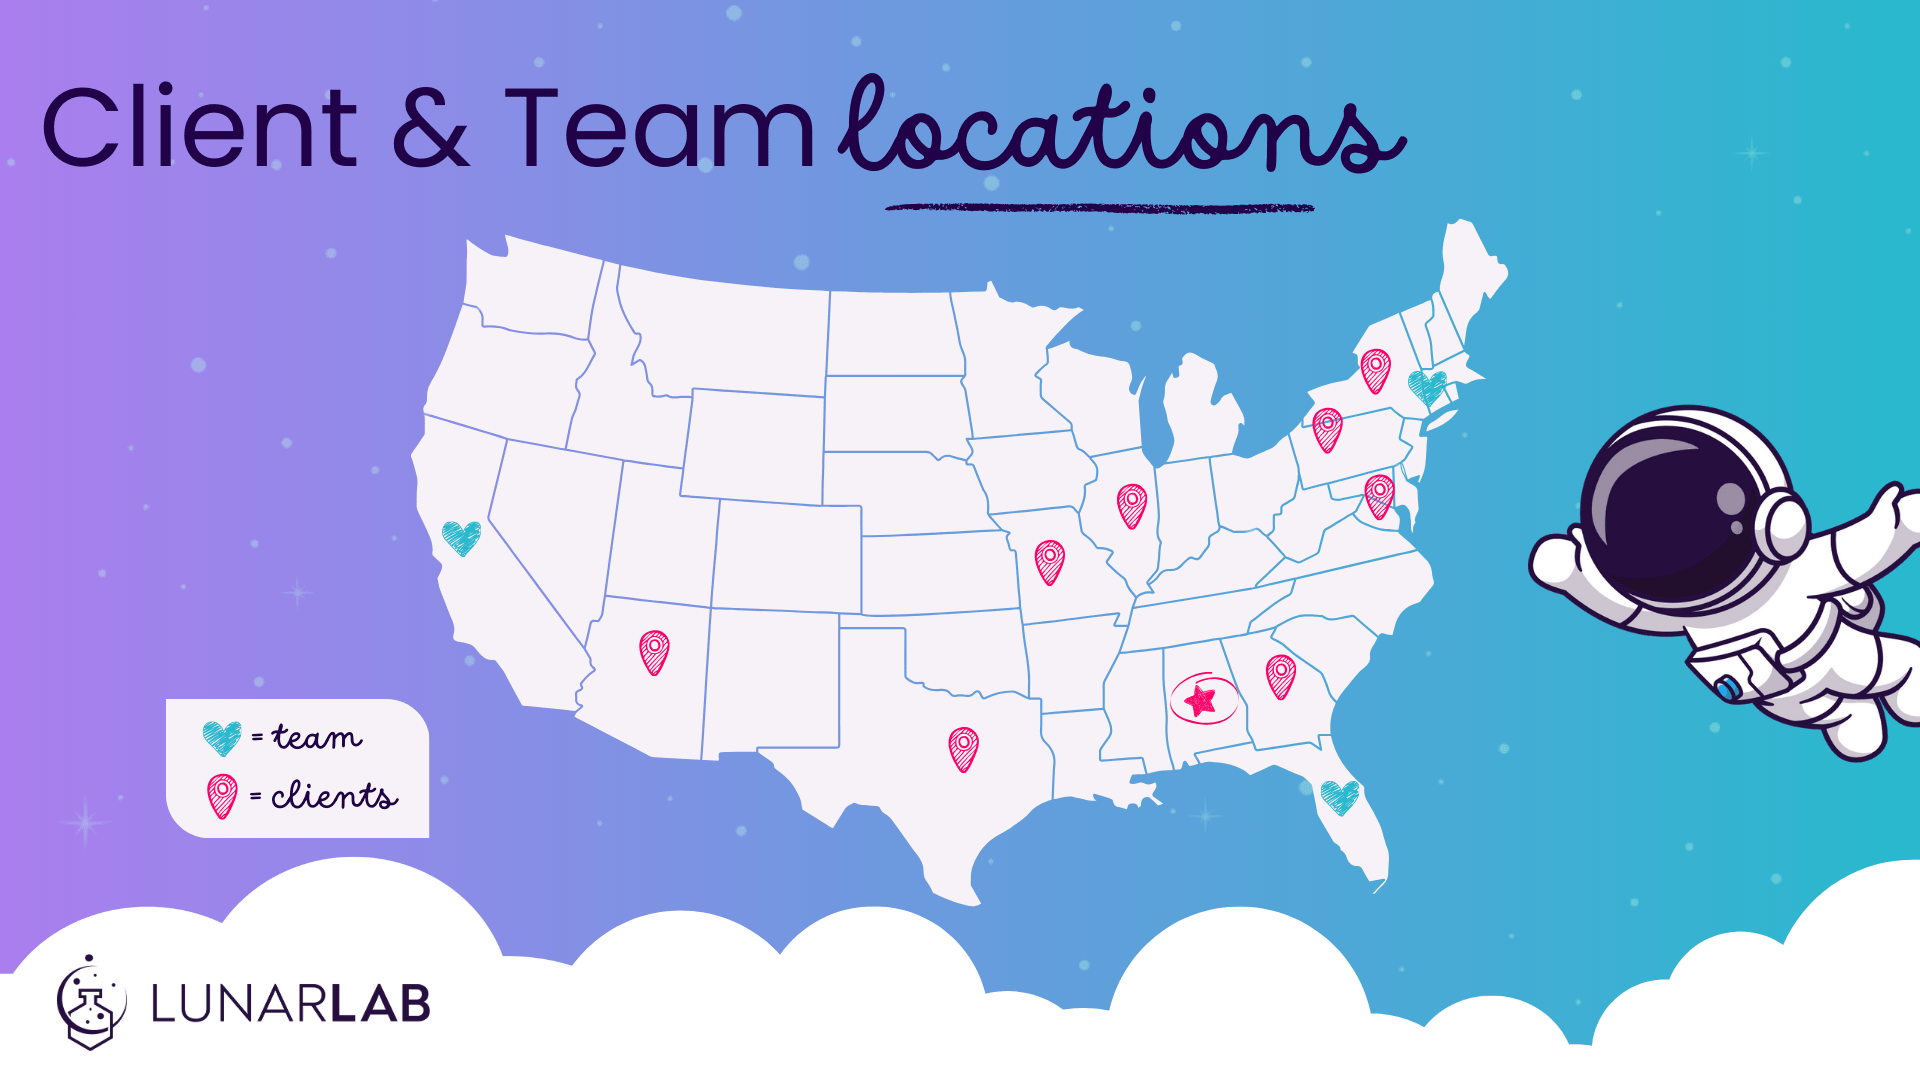 purple and teal gradient background with white clouds and map of the United States. Pink pins on the map show LunarLab's client locations in Alabama, South Carolina, Tennessee, Delaware, and New York. Blue pins on the map show LunarLab's team members in Alabama, Georgia, New York, and Florida.